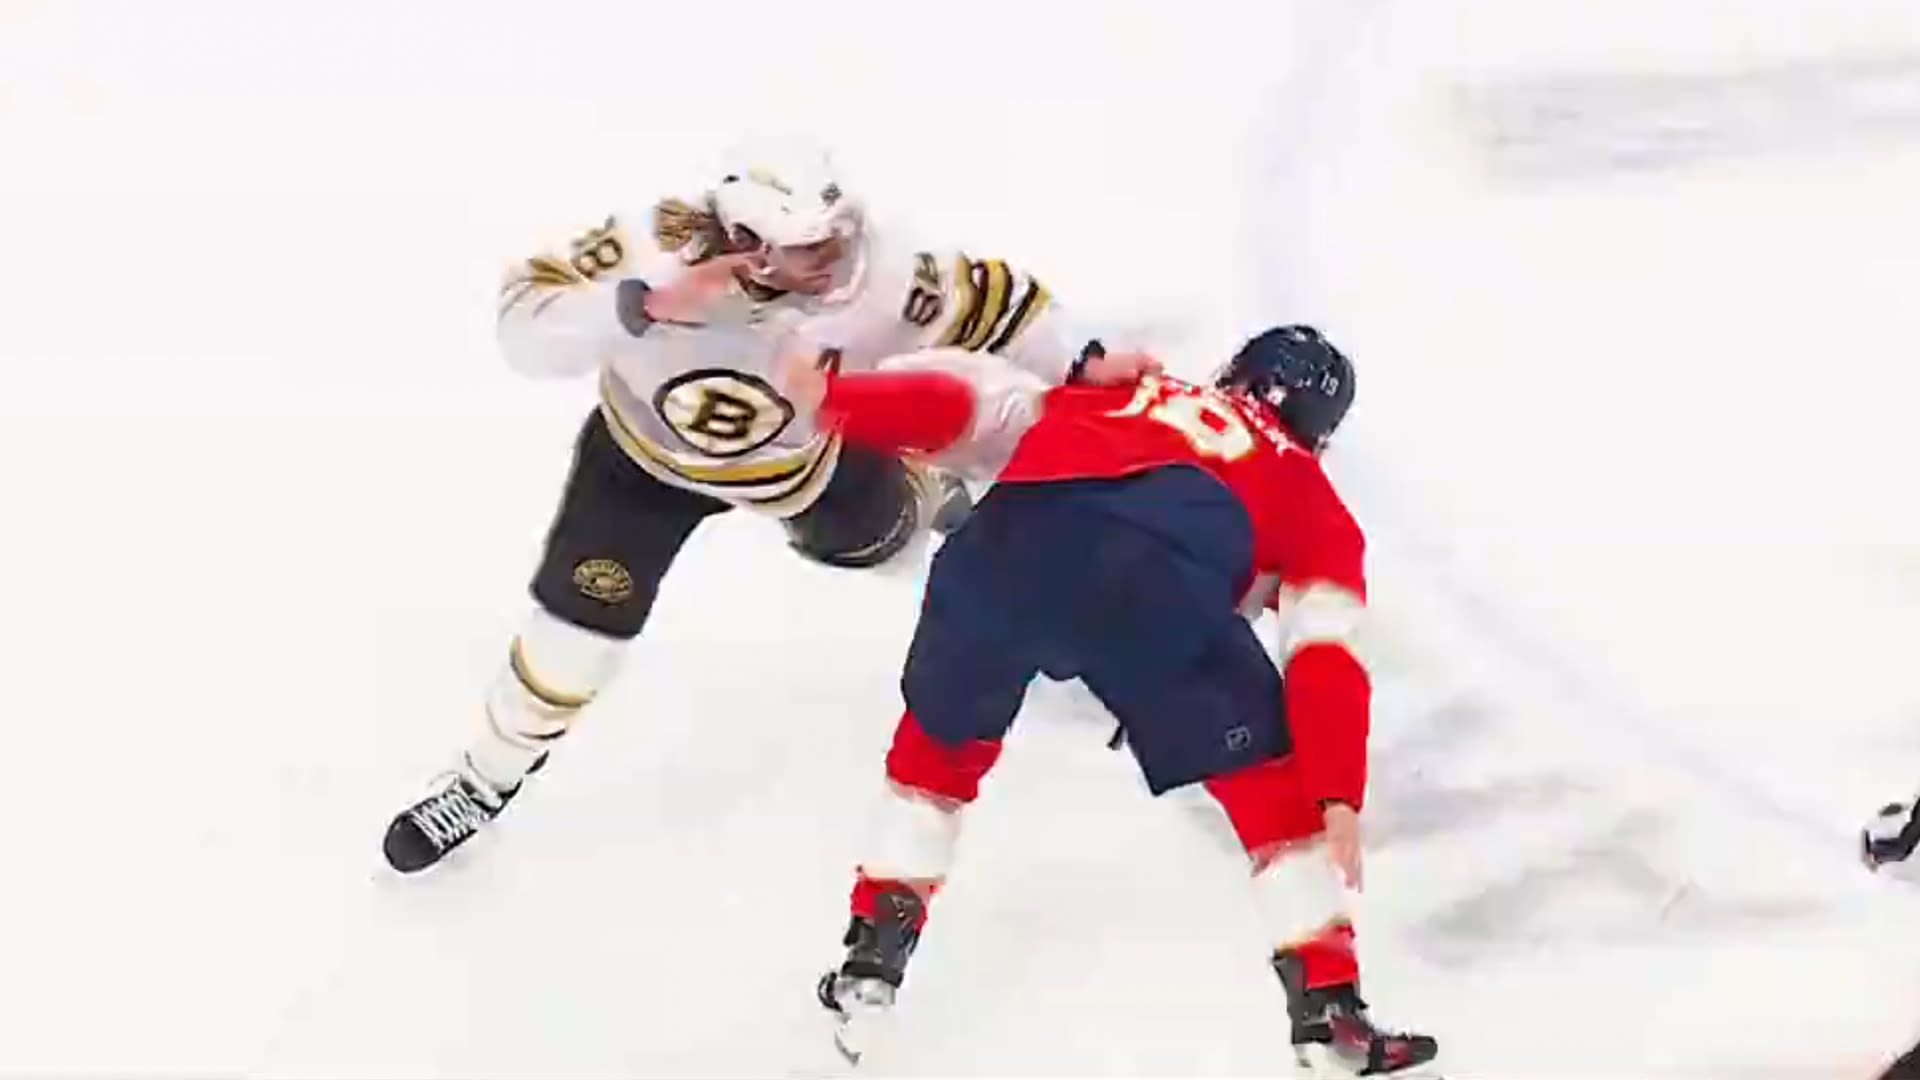 David Pastrnak has strong claim after he and star fight during NHL playoff clash